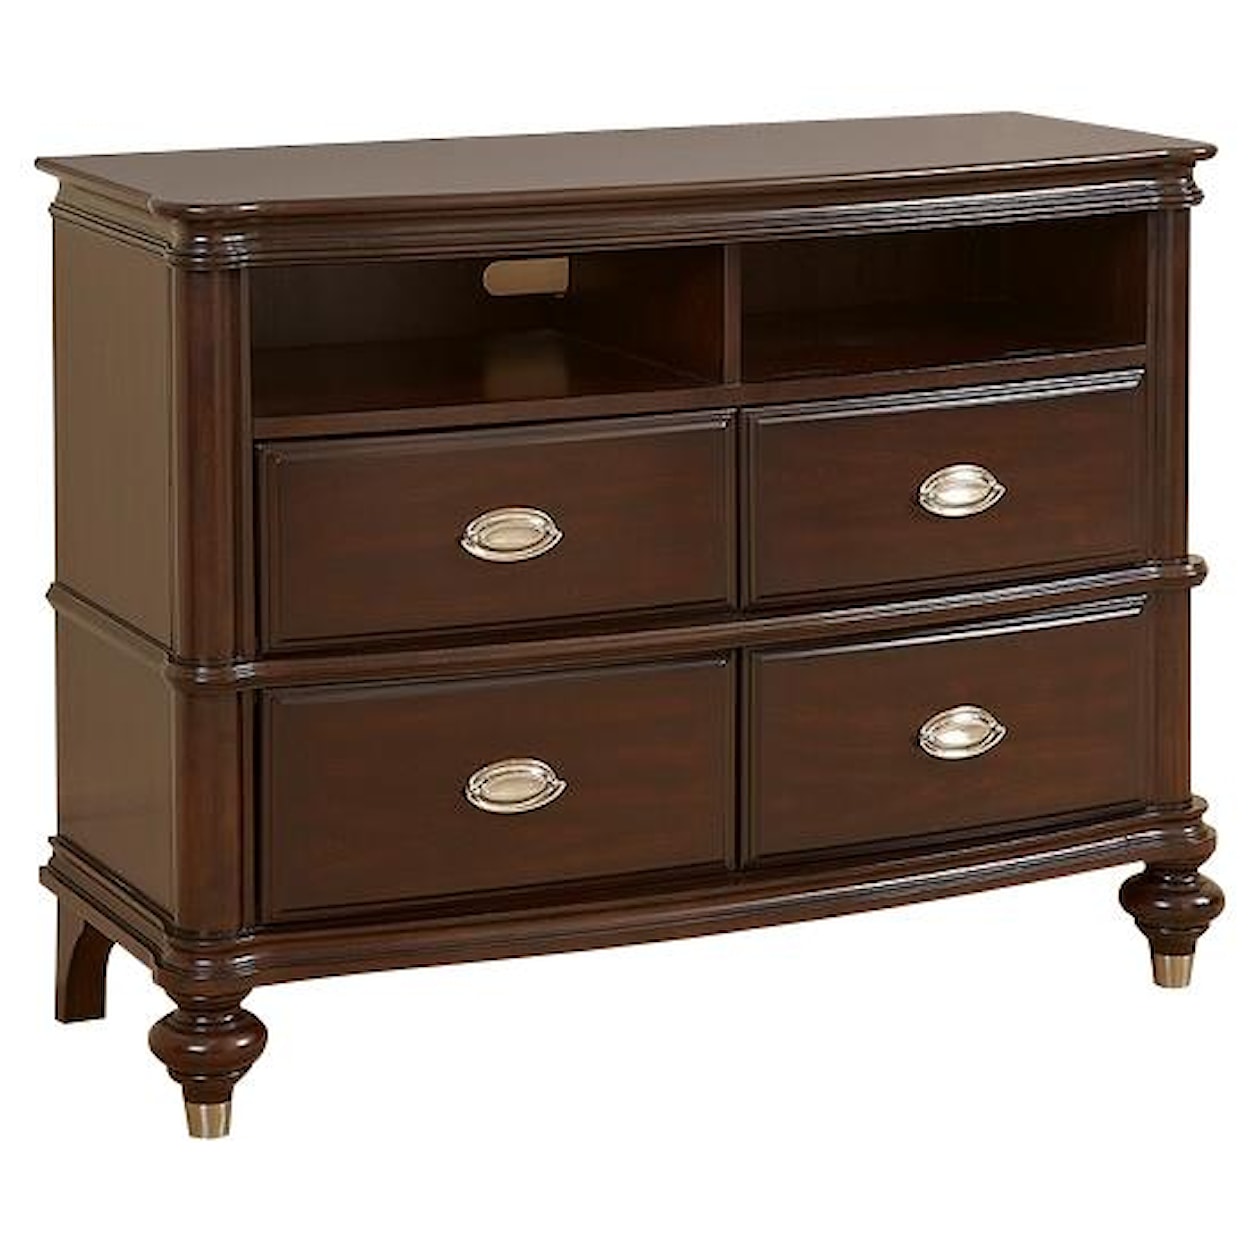 Avalon Furniture Dundee Place Media Chest